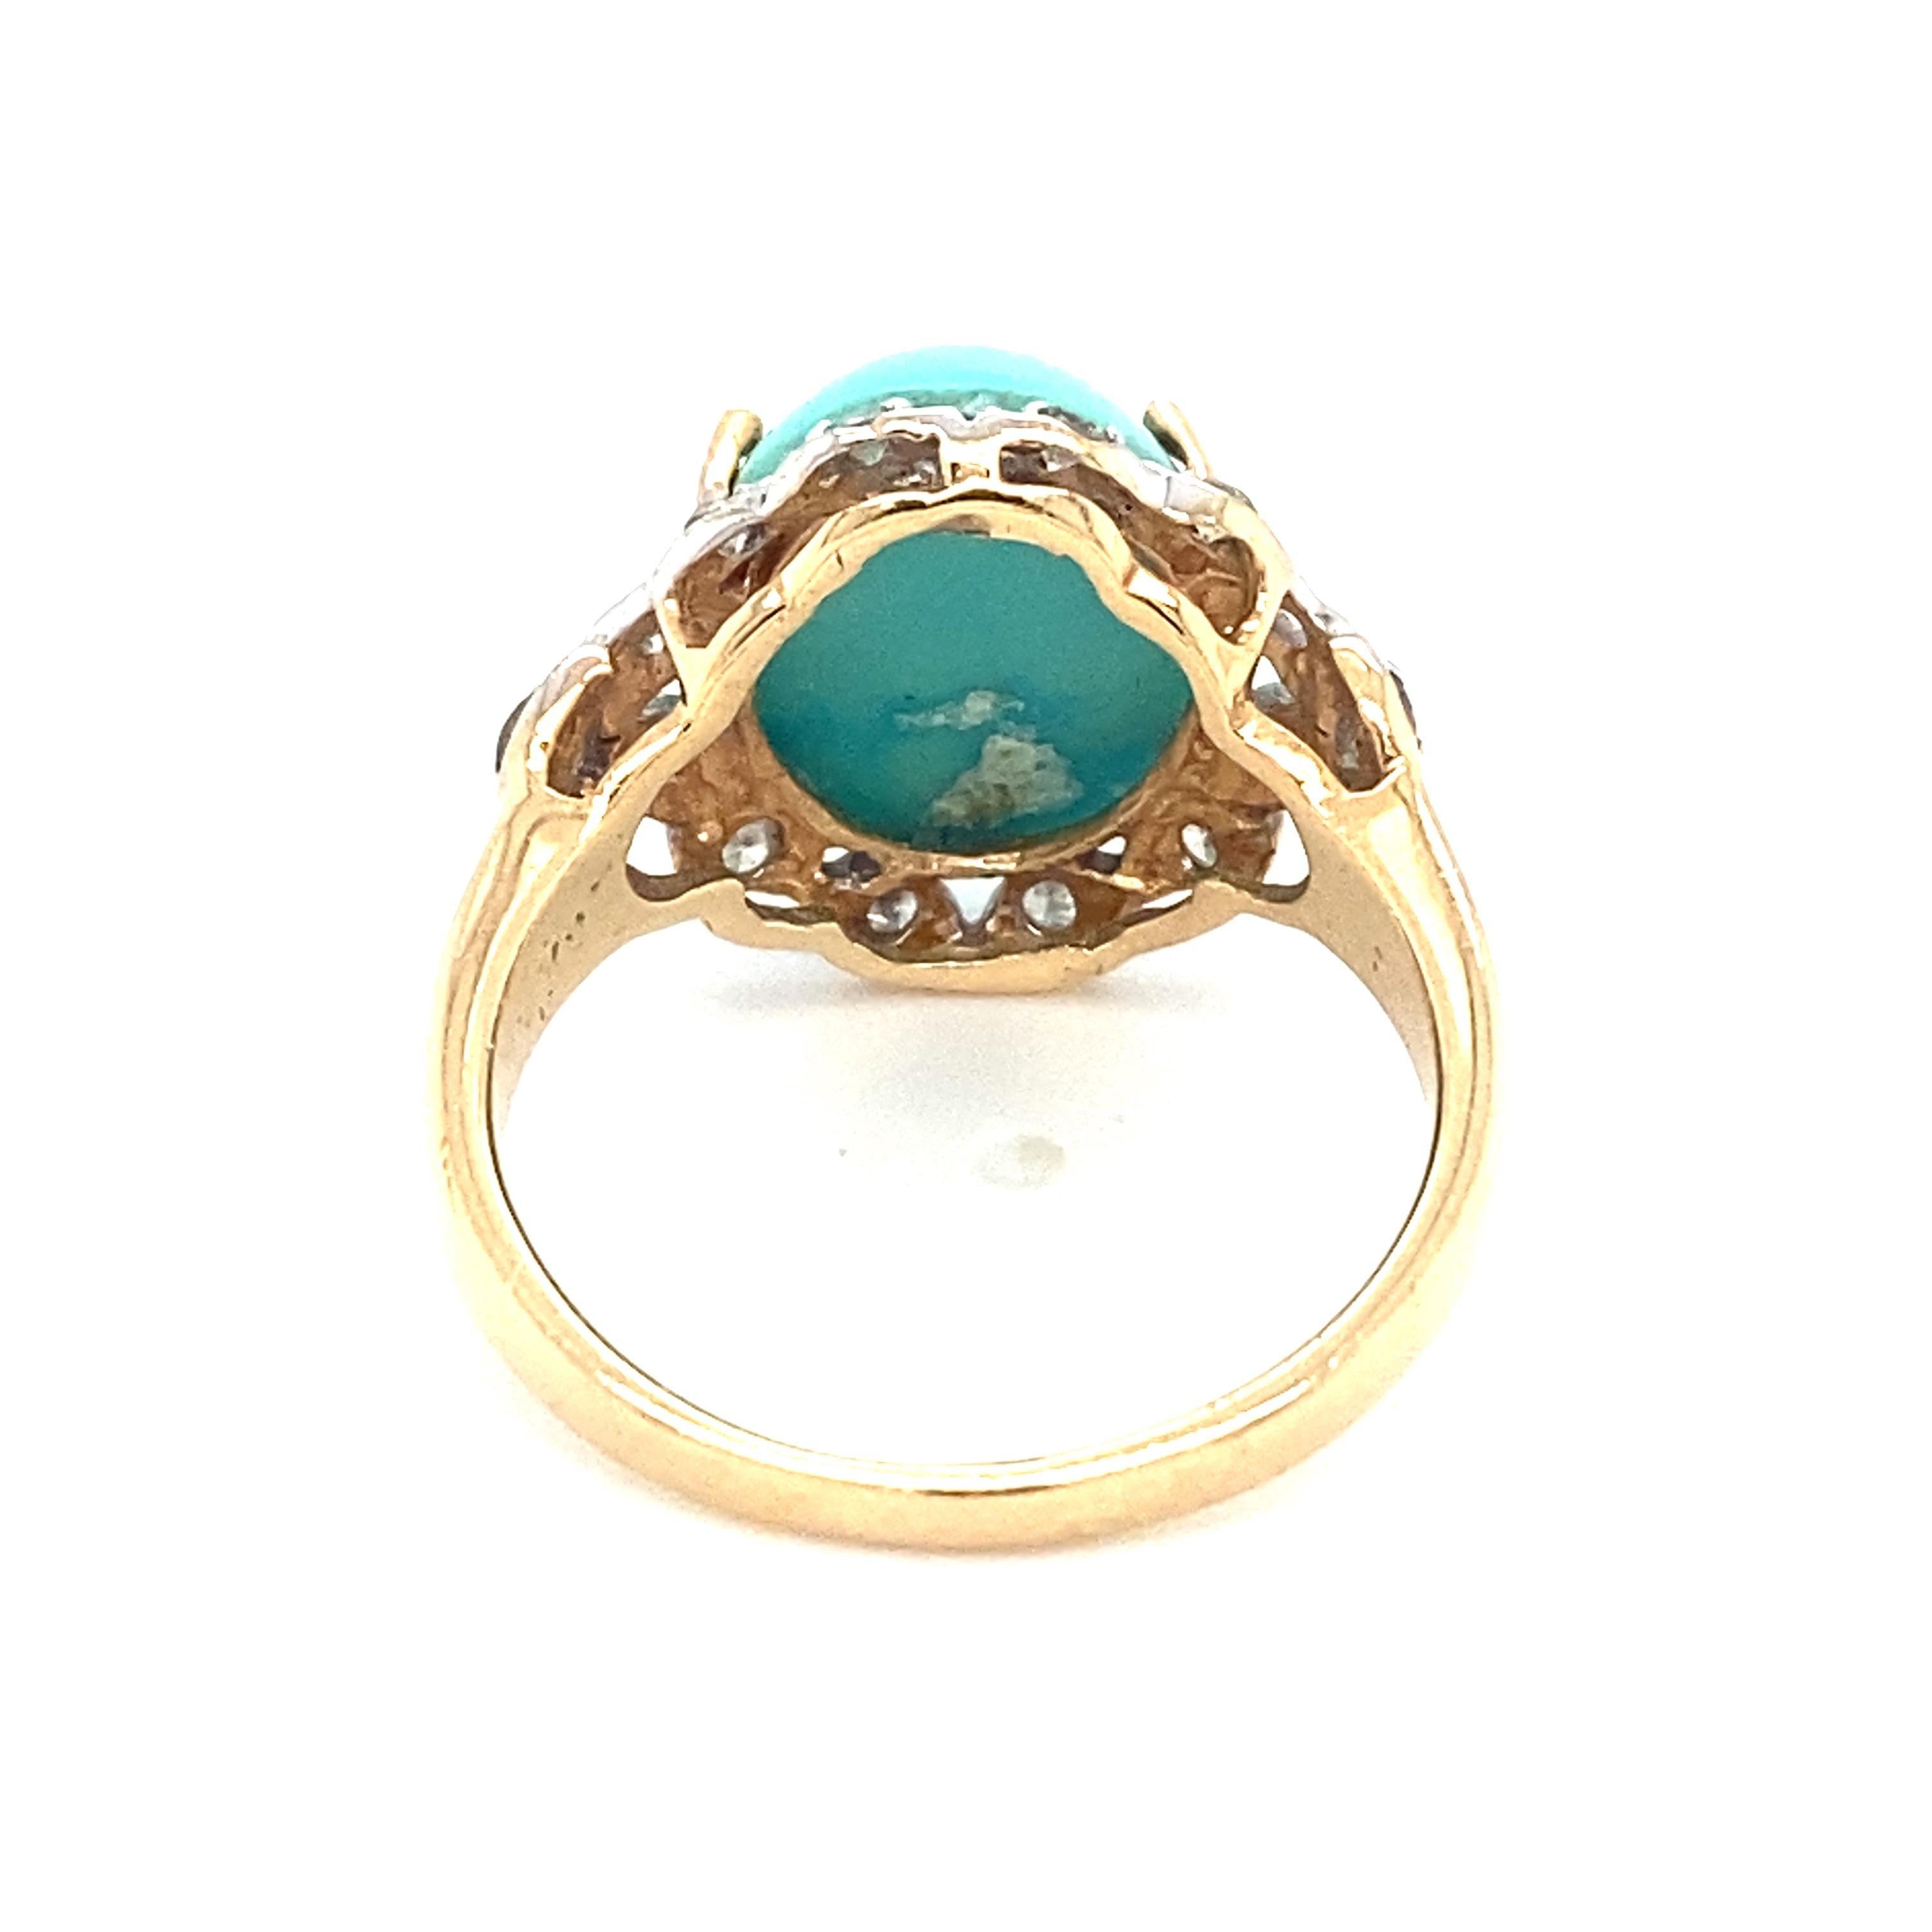 Item Details: This ring features a bright blue Persian turquoise stone with accent diamonds. The turquoise is set in 4 prongs and has beautiful diamond accent detailing and subtle etching on the gallery. The contrast between white and yellow gold